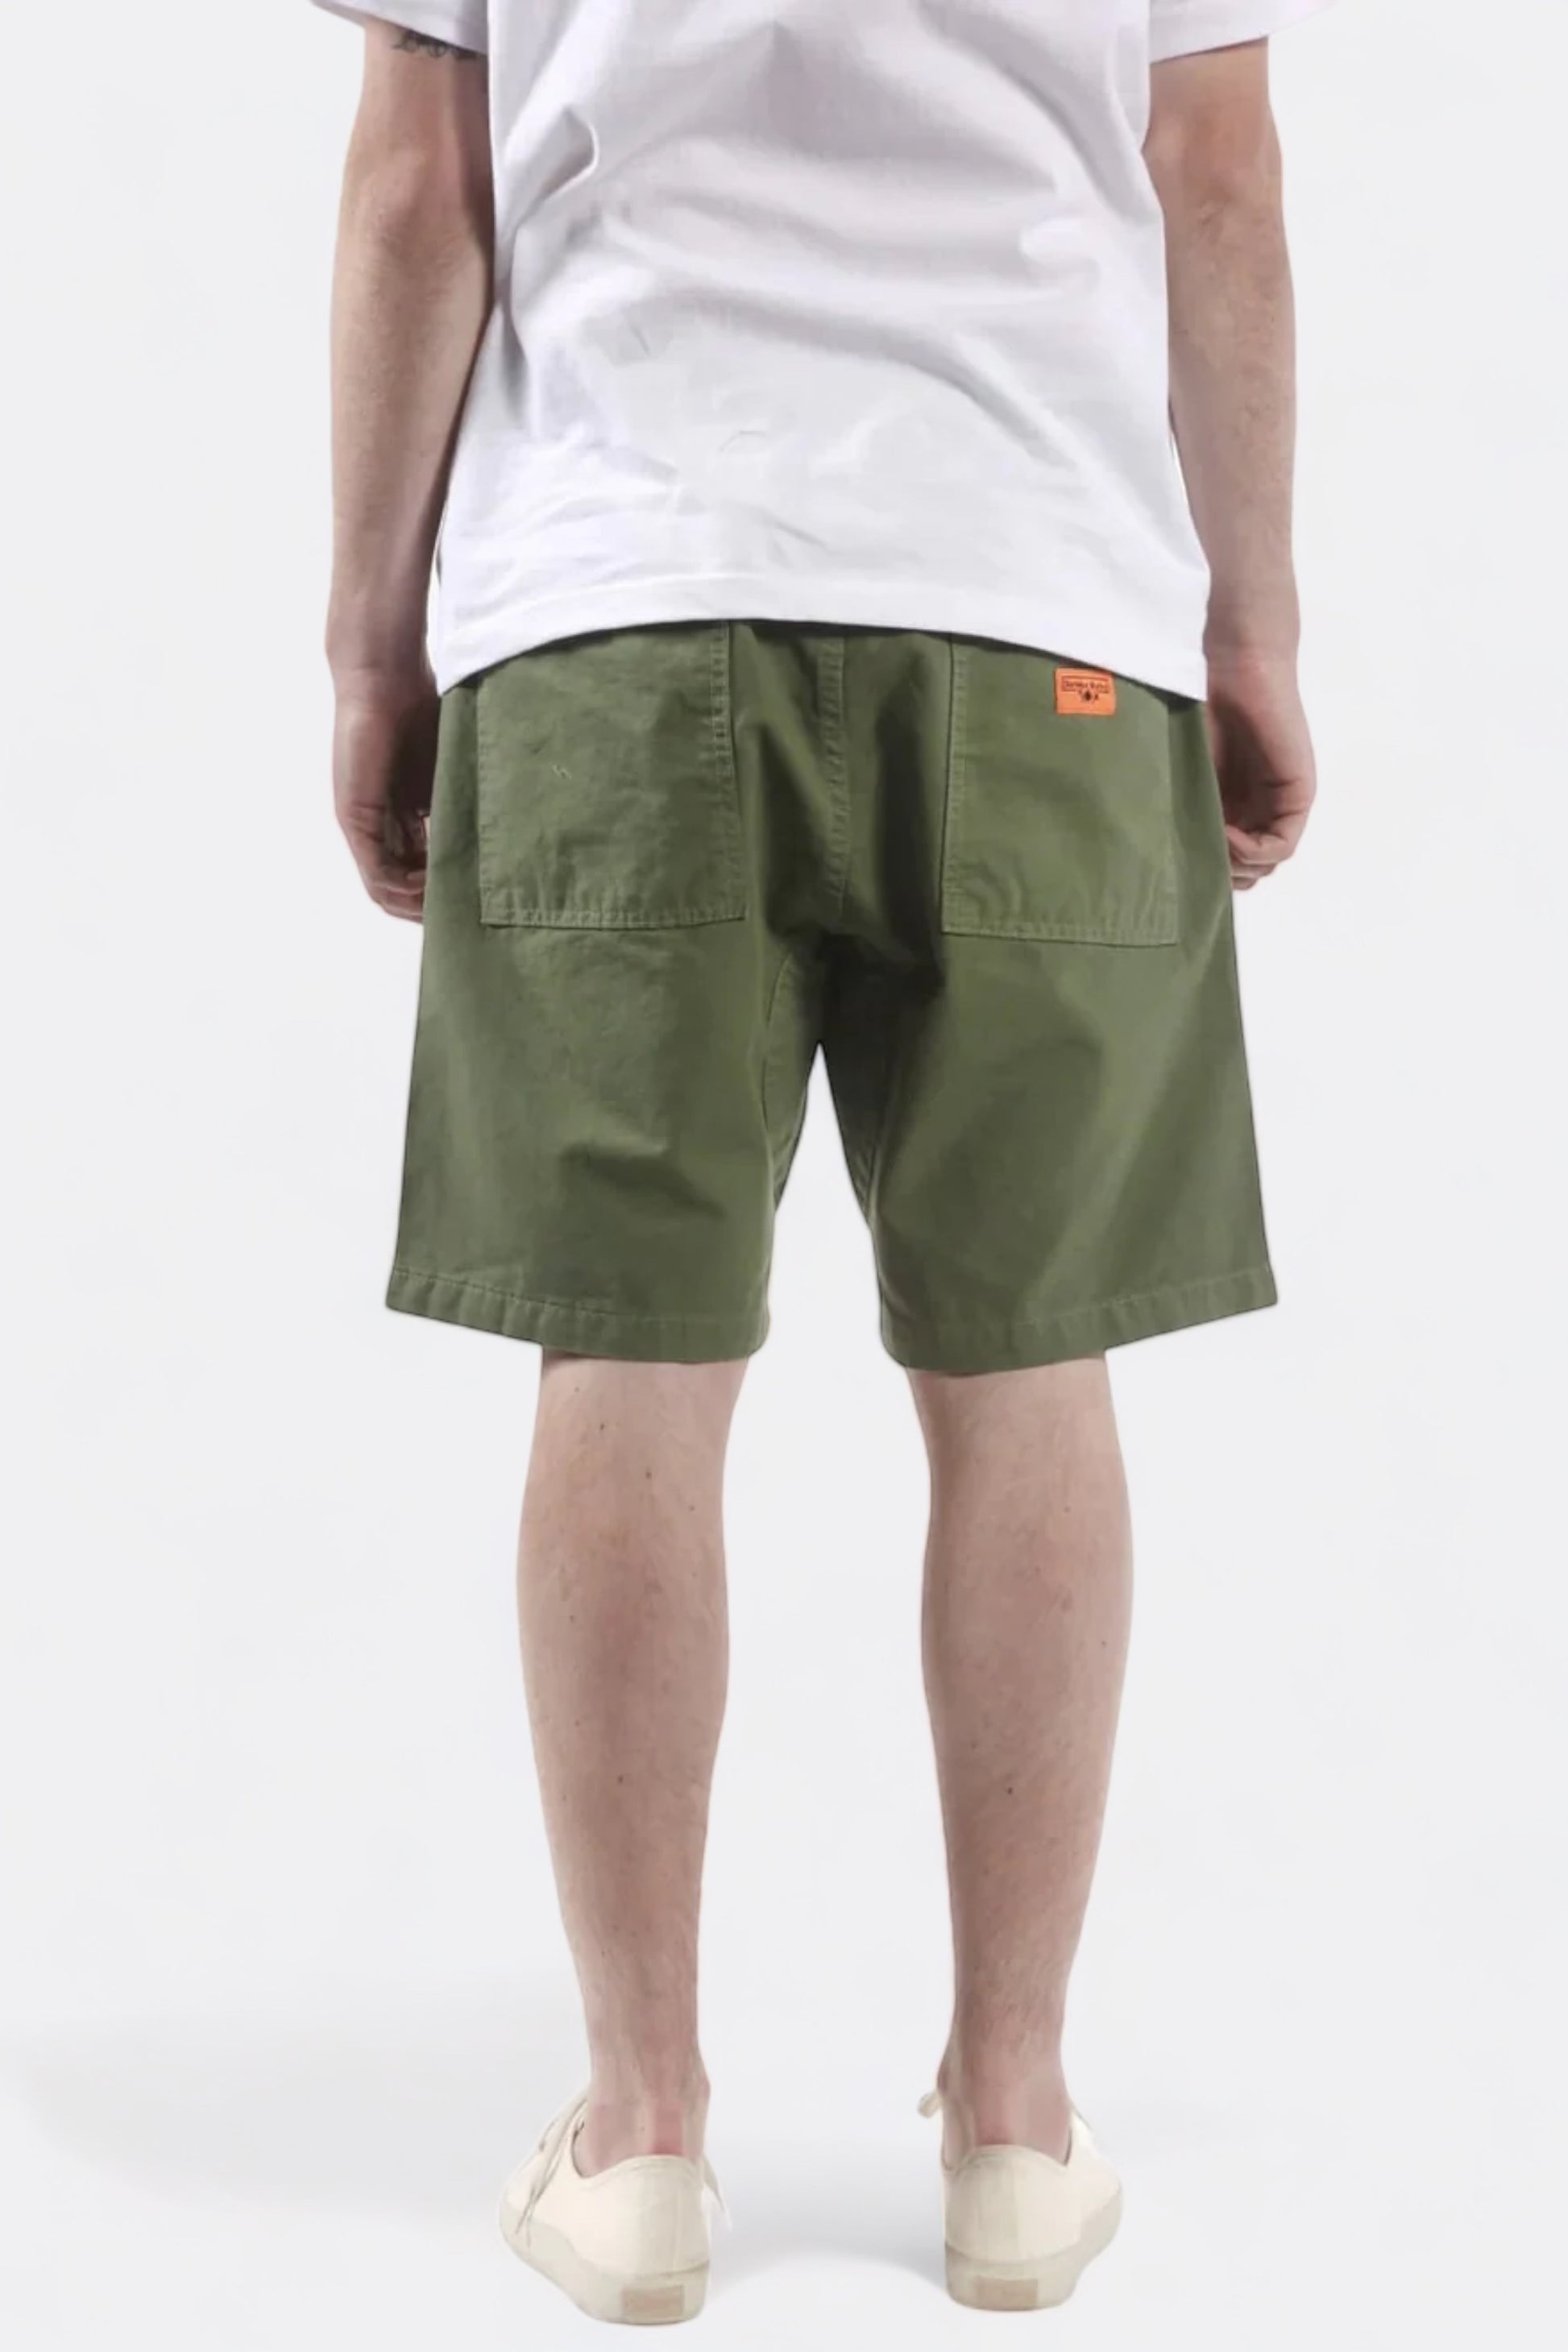 Service Works - Canvas Chef Shorts (Gold)